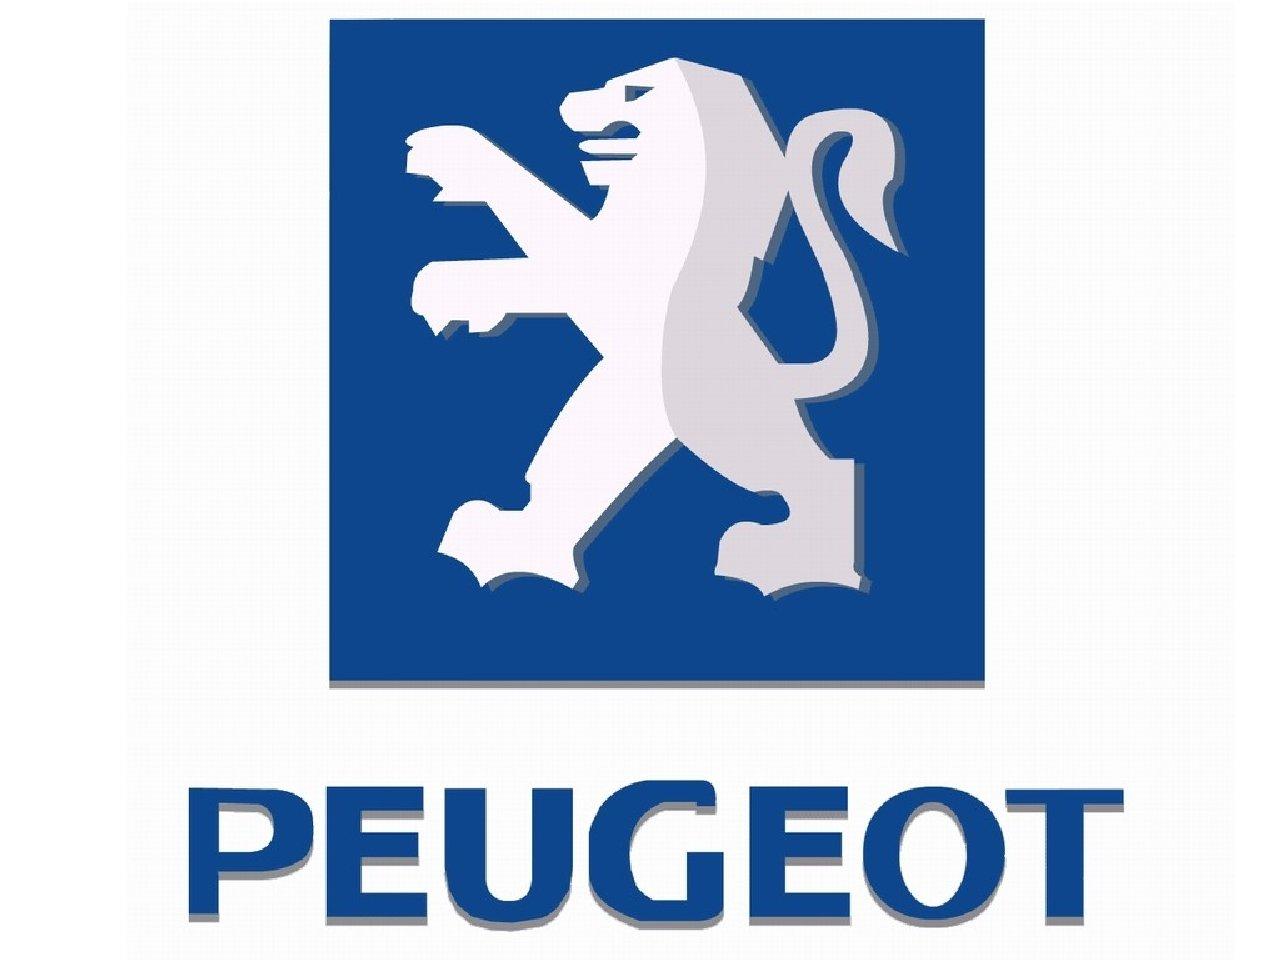 Peugeot Wallpapers and Backgrounds Wallpaper